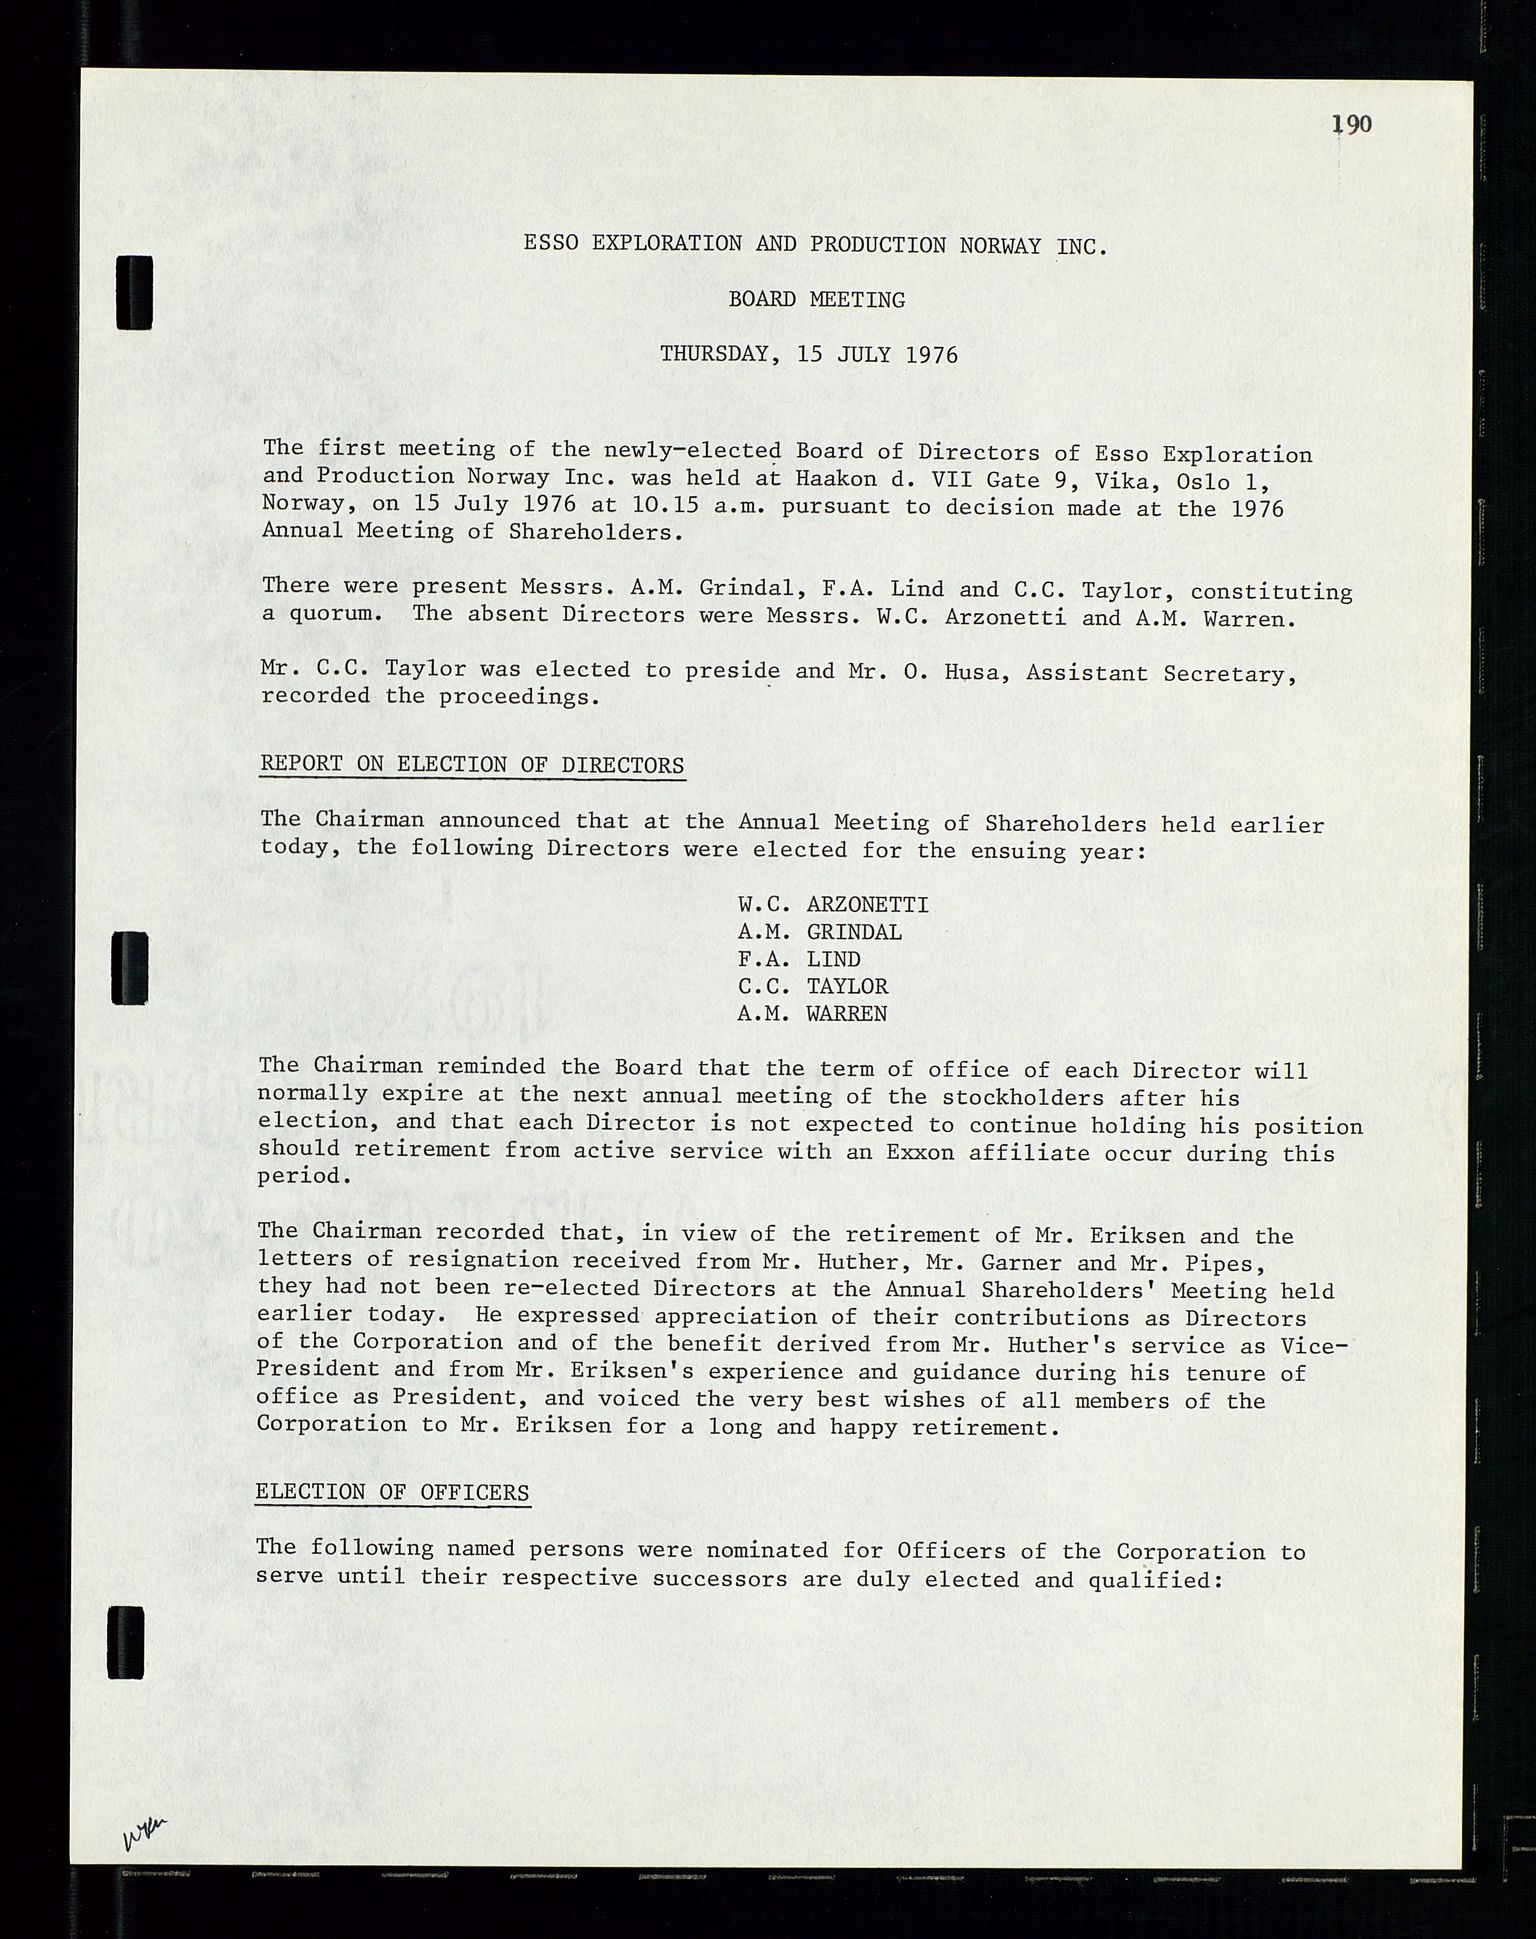 Pa 1512 - Esso Exploration and Production Norway Inc., SAST/A-101917/A/Aa/L0001/0002: Styredokumenter / Corporate records, Board meeting minutes, Agreements, Stocholder meetings, 1975-1979, p. 40